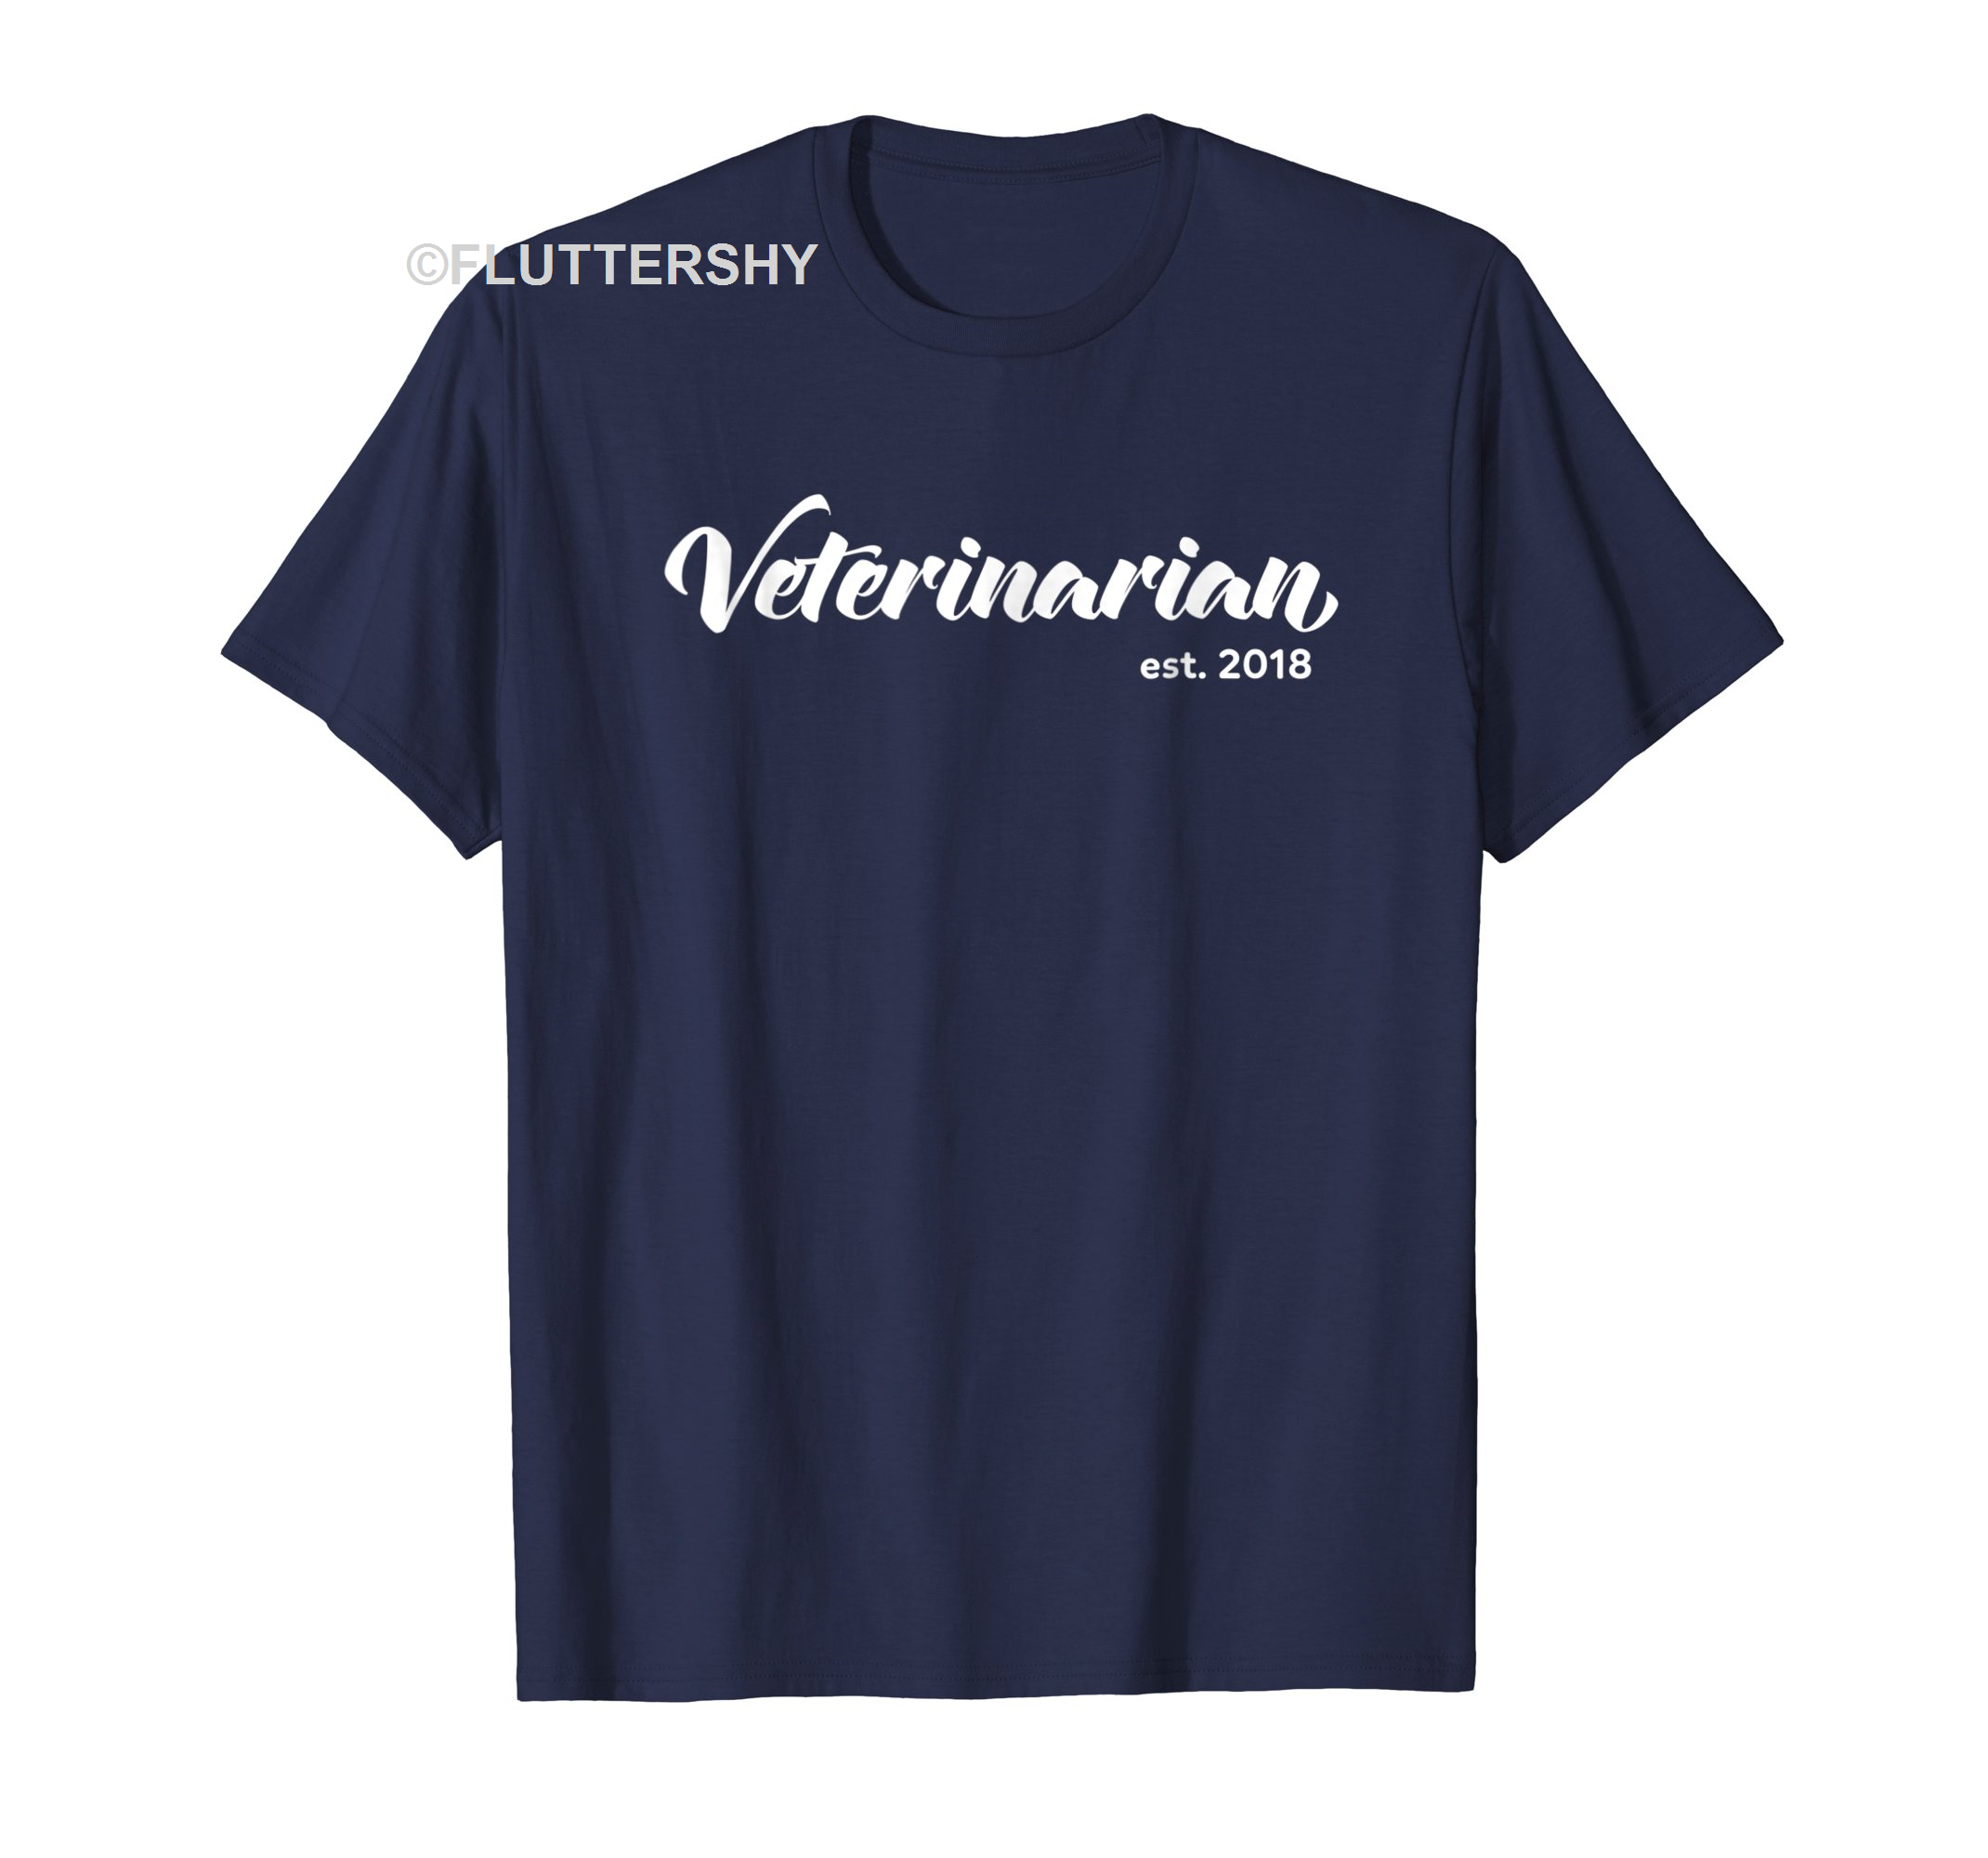 Blithesome Check Out This Awesome Vet School Graduation Gift For Veterinarians Est 2018 Sh